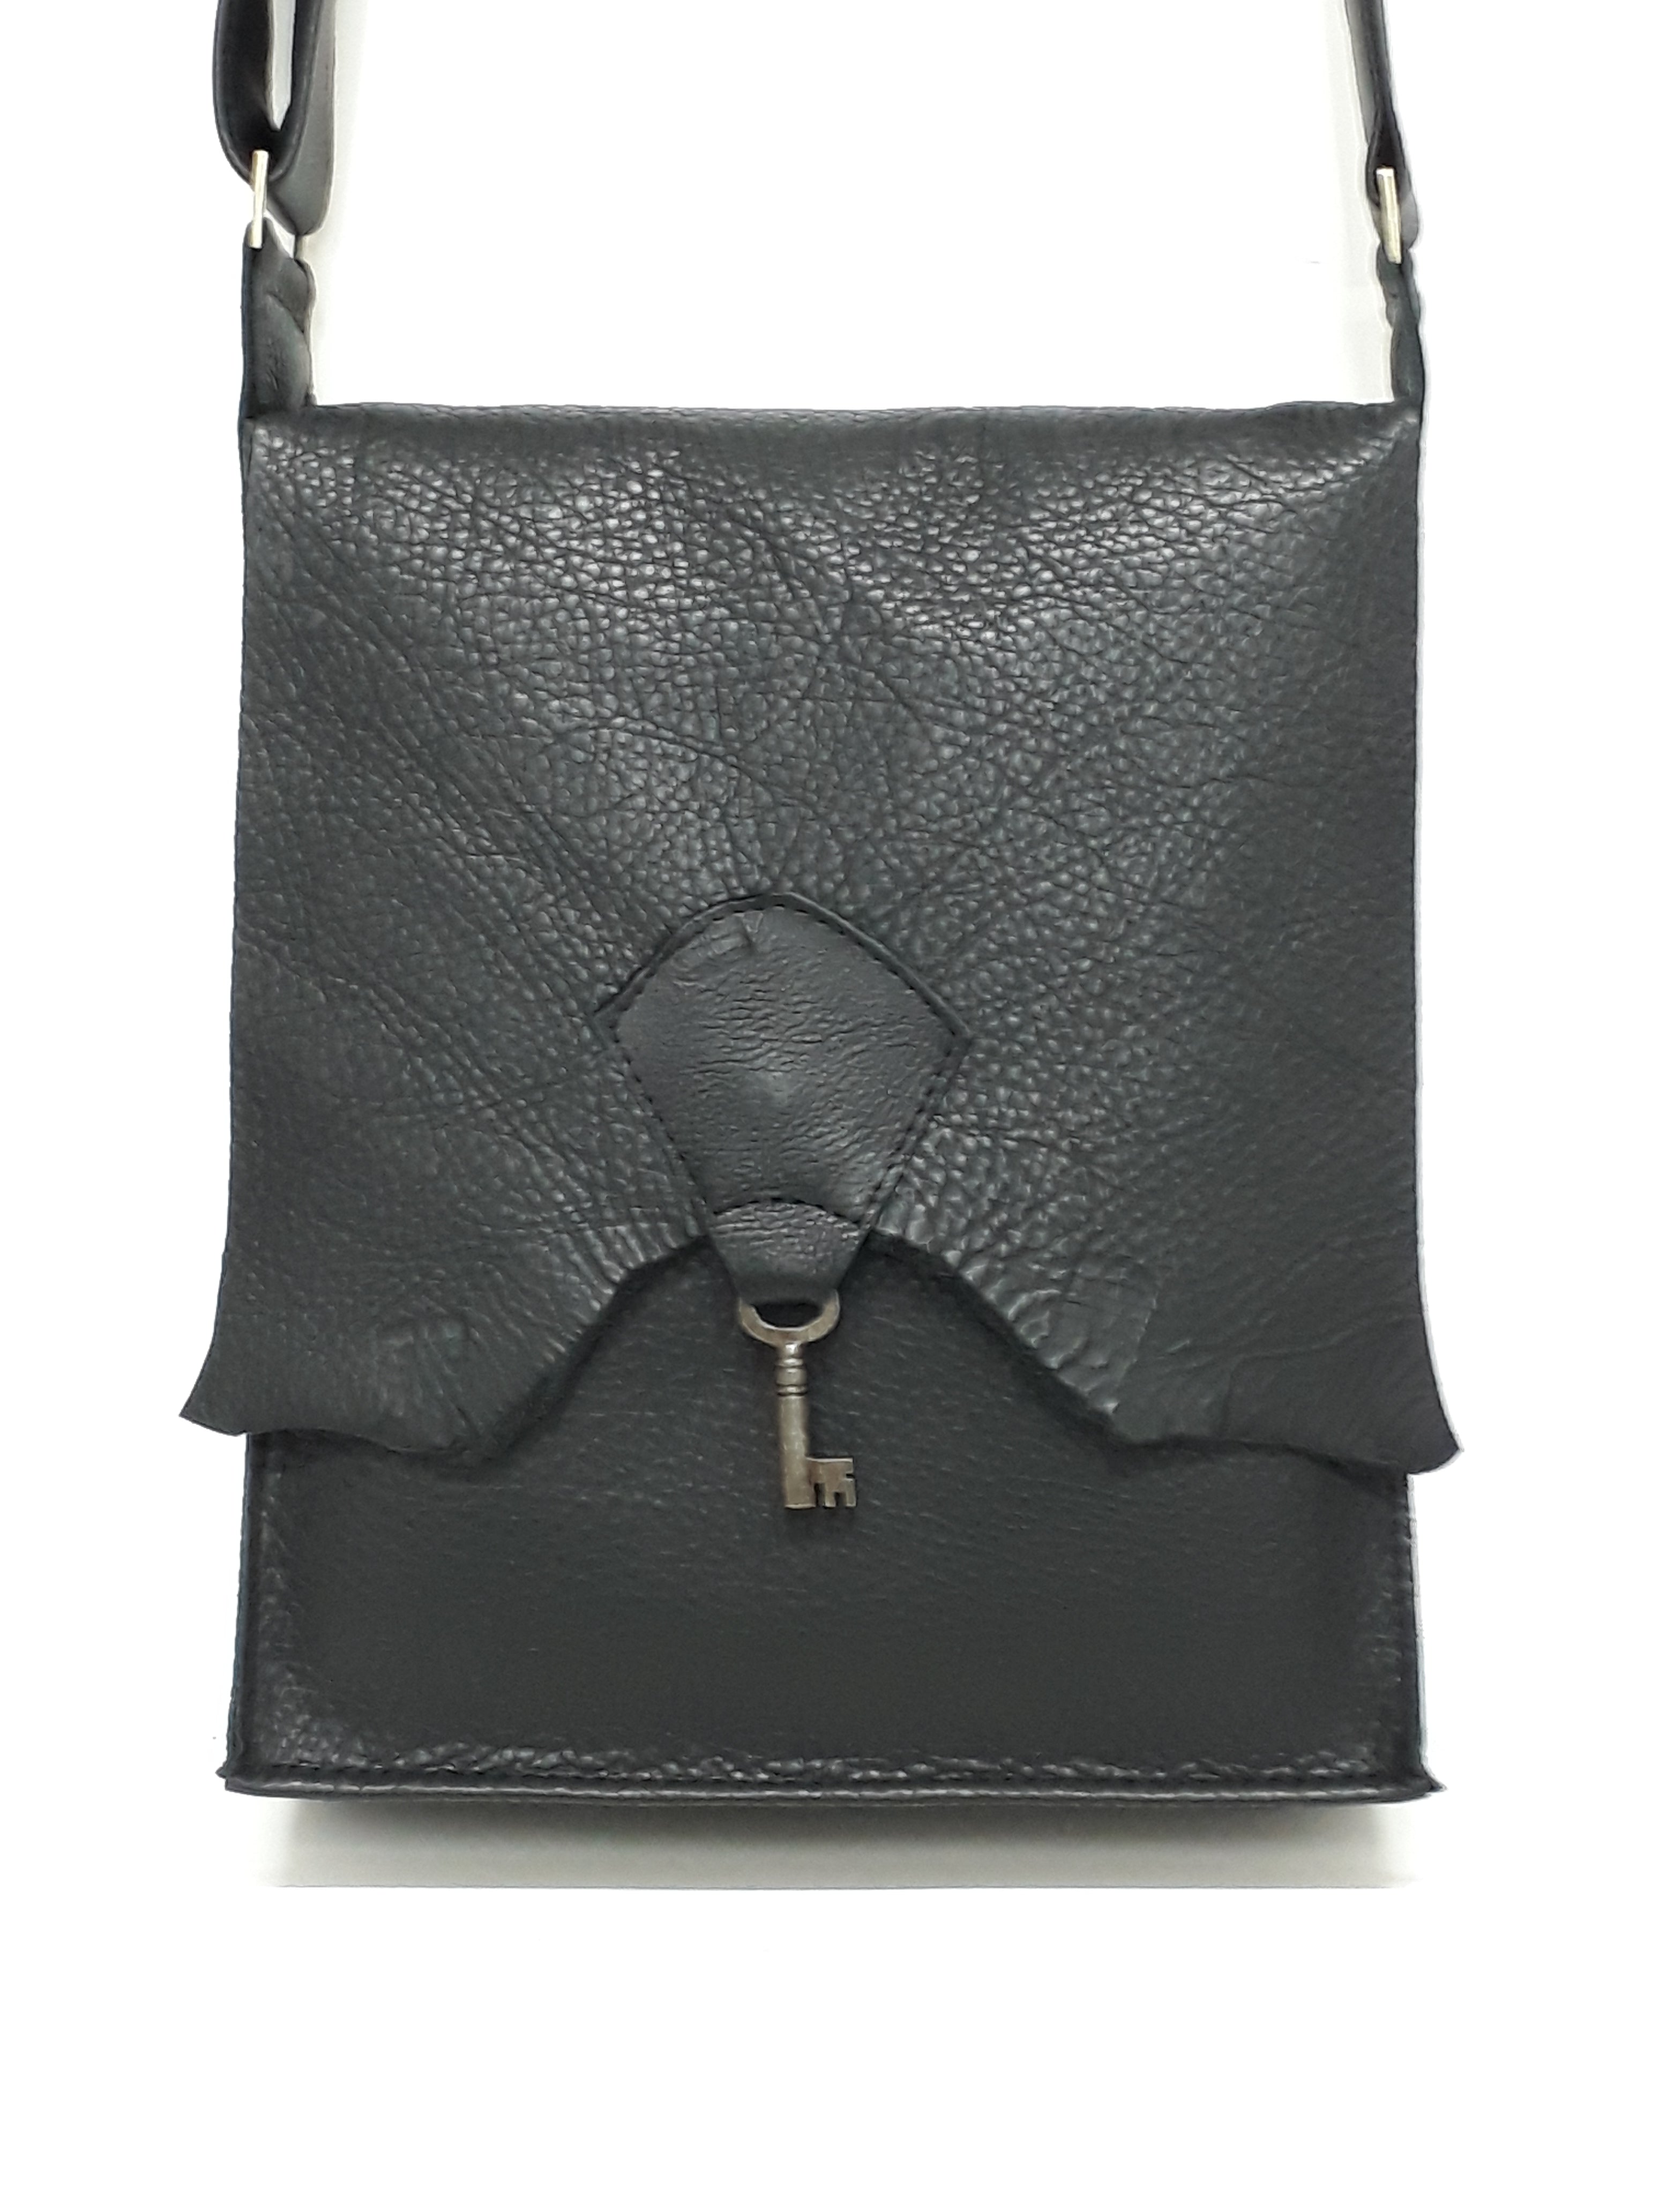 Raw Edge Leather Bag with Vintage Key Detail - Black - Coterie Leather Bags